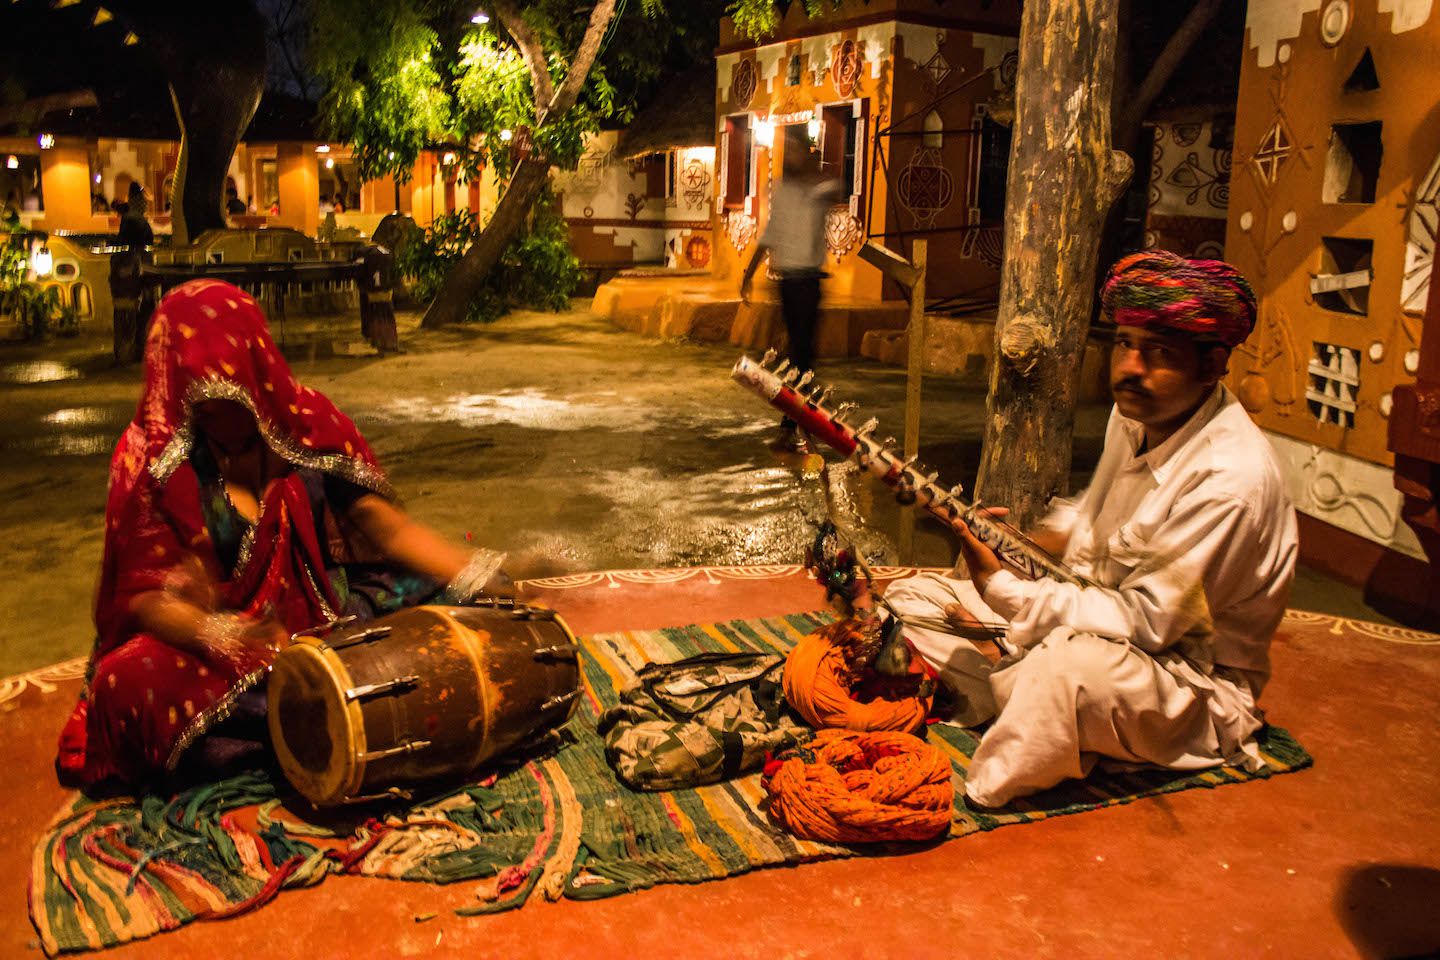 Locals playing typical songs, Jaipur, India